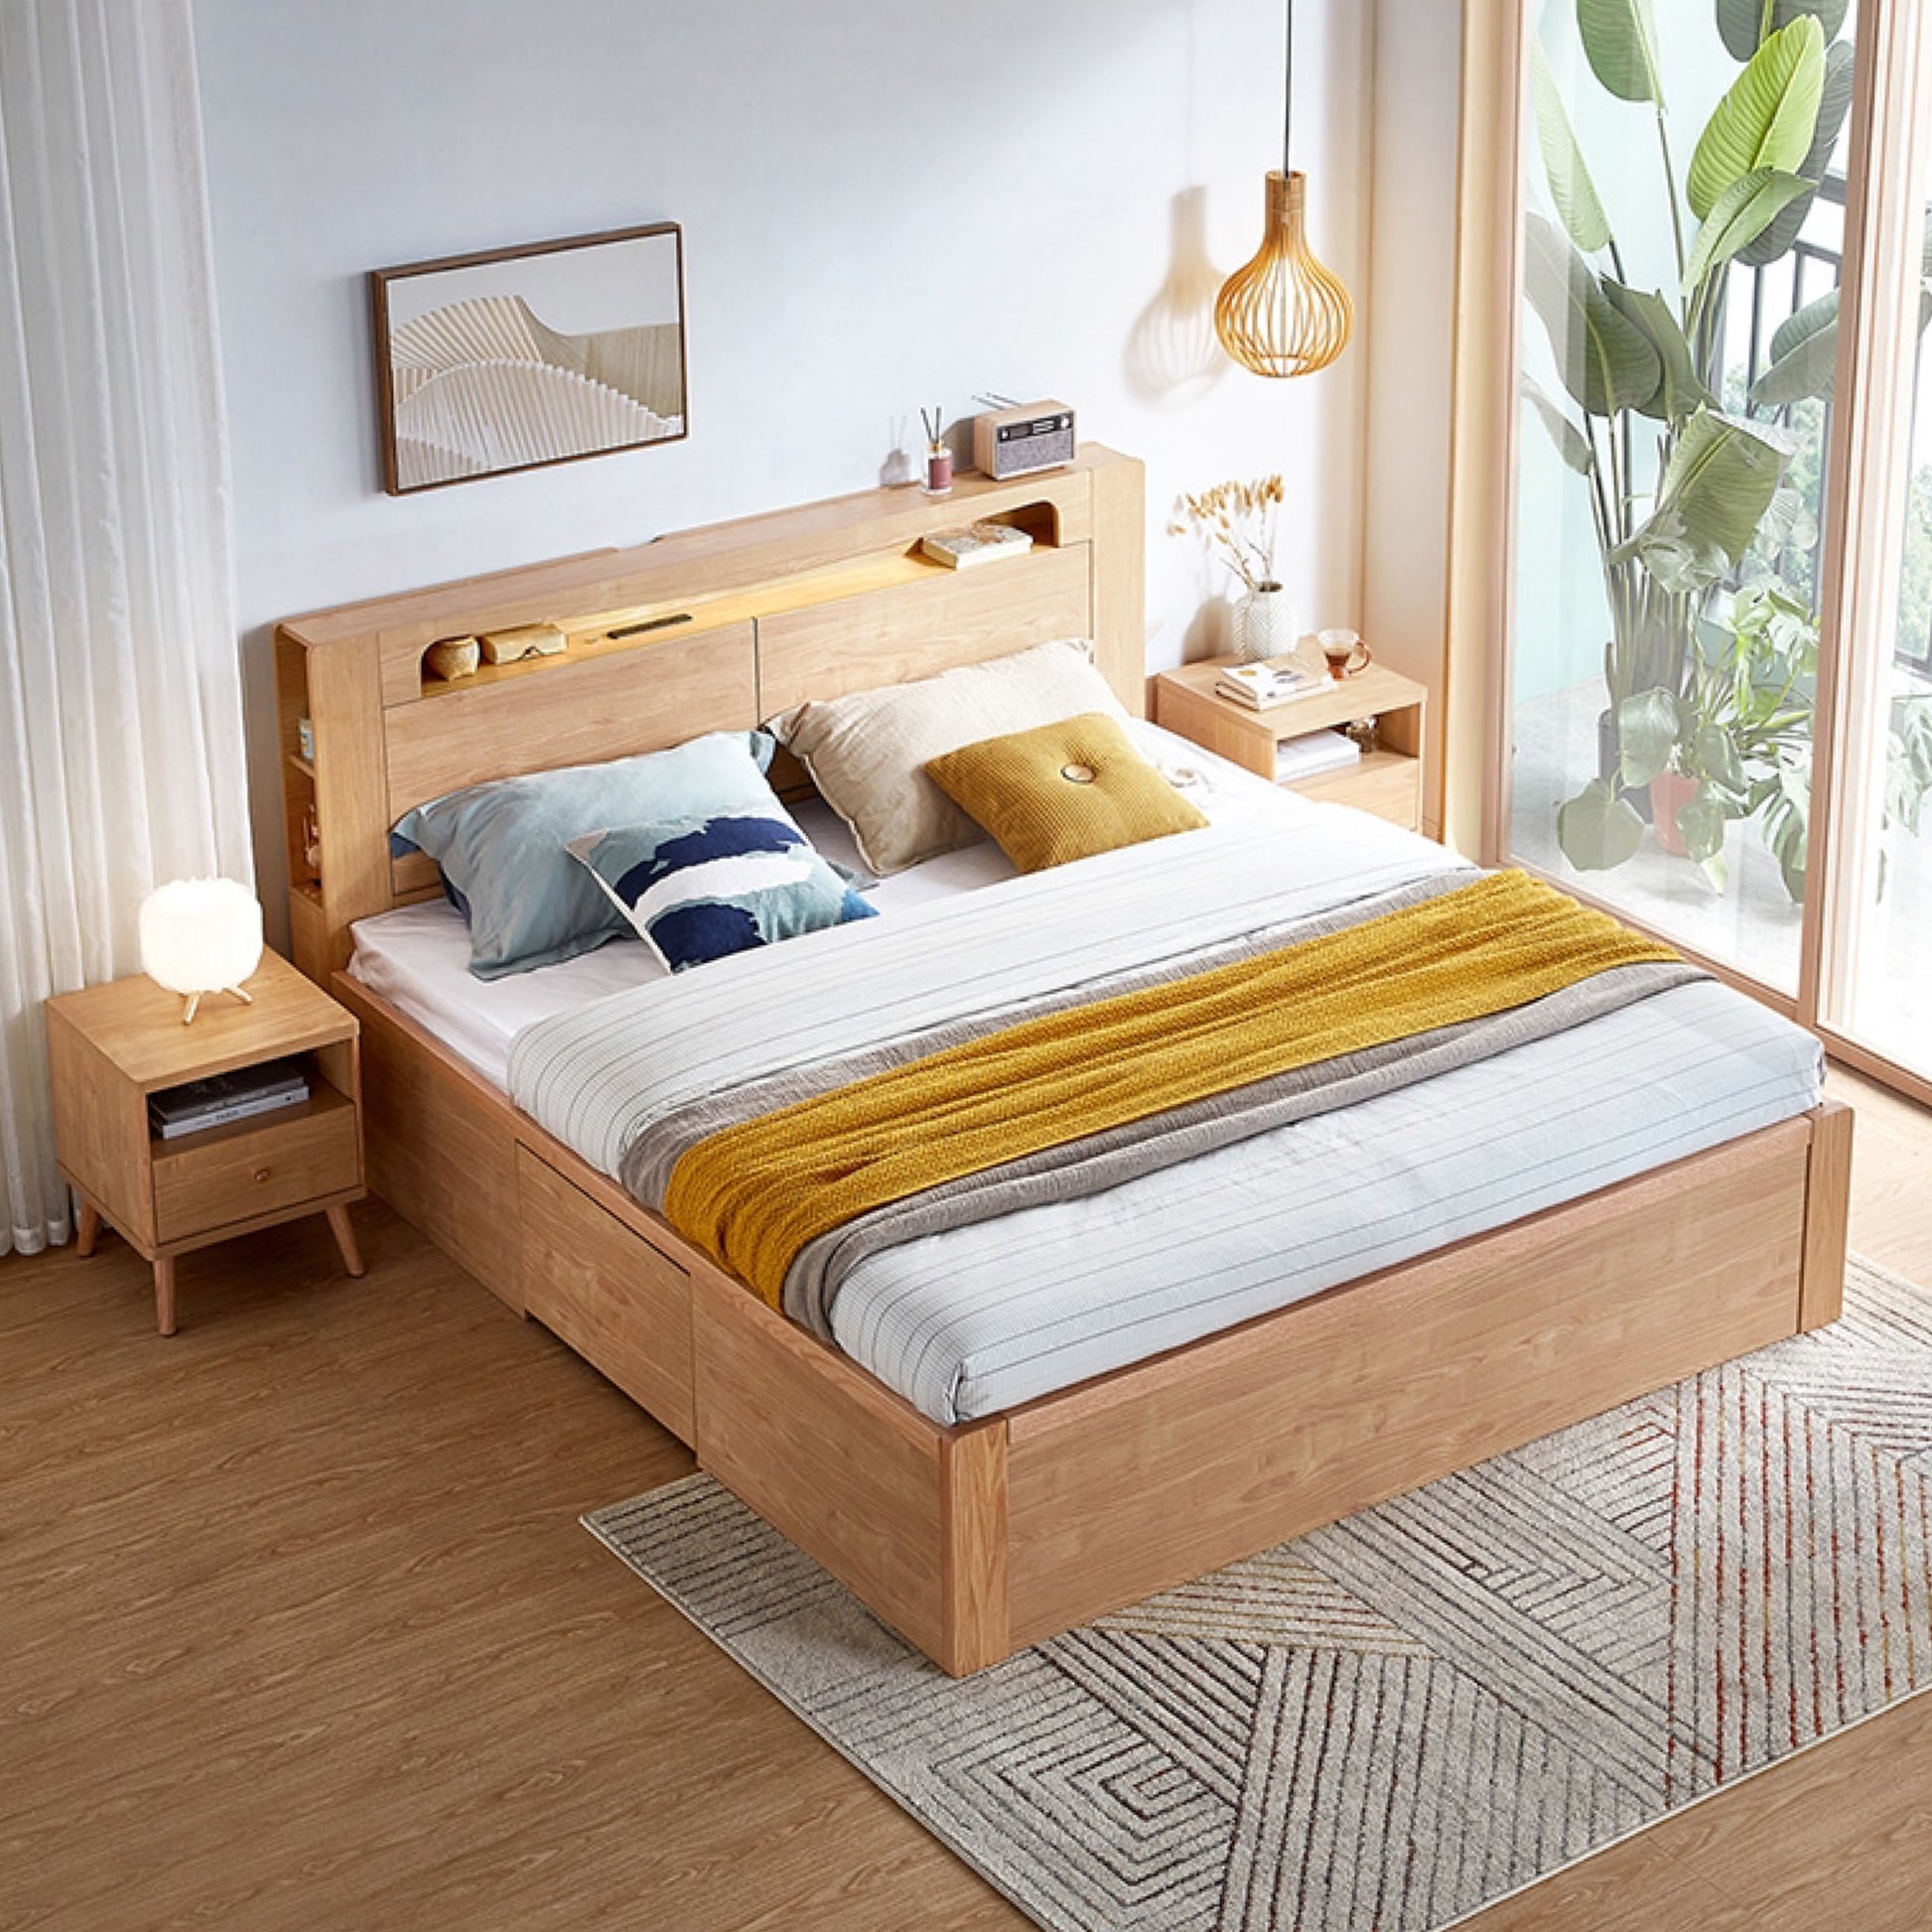 bedroom-beds-cushions-cover-pillow-bed base